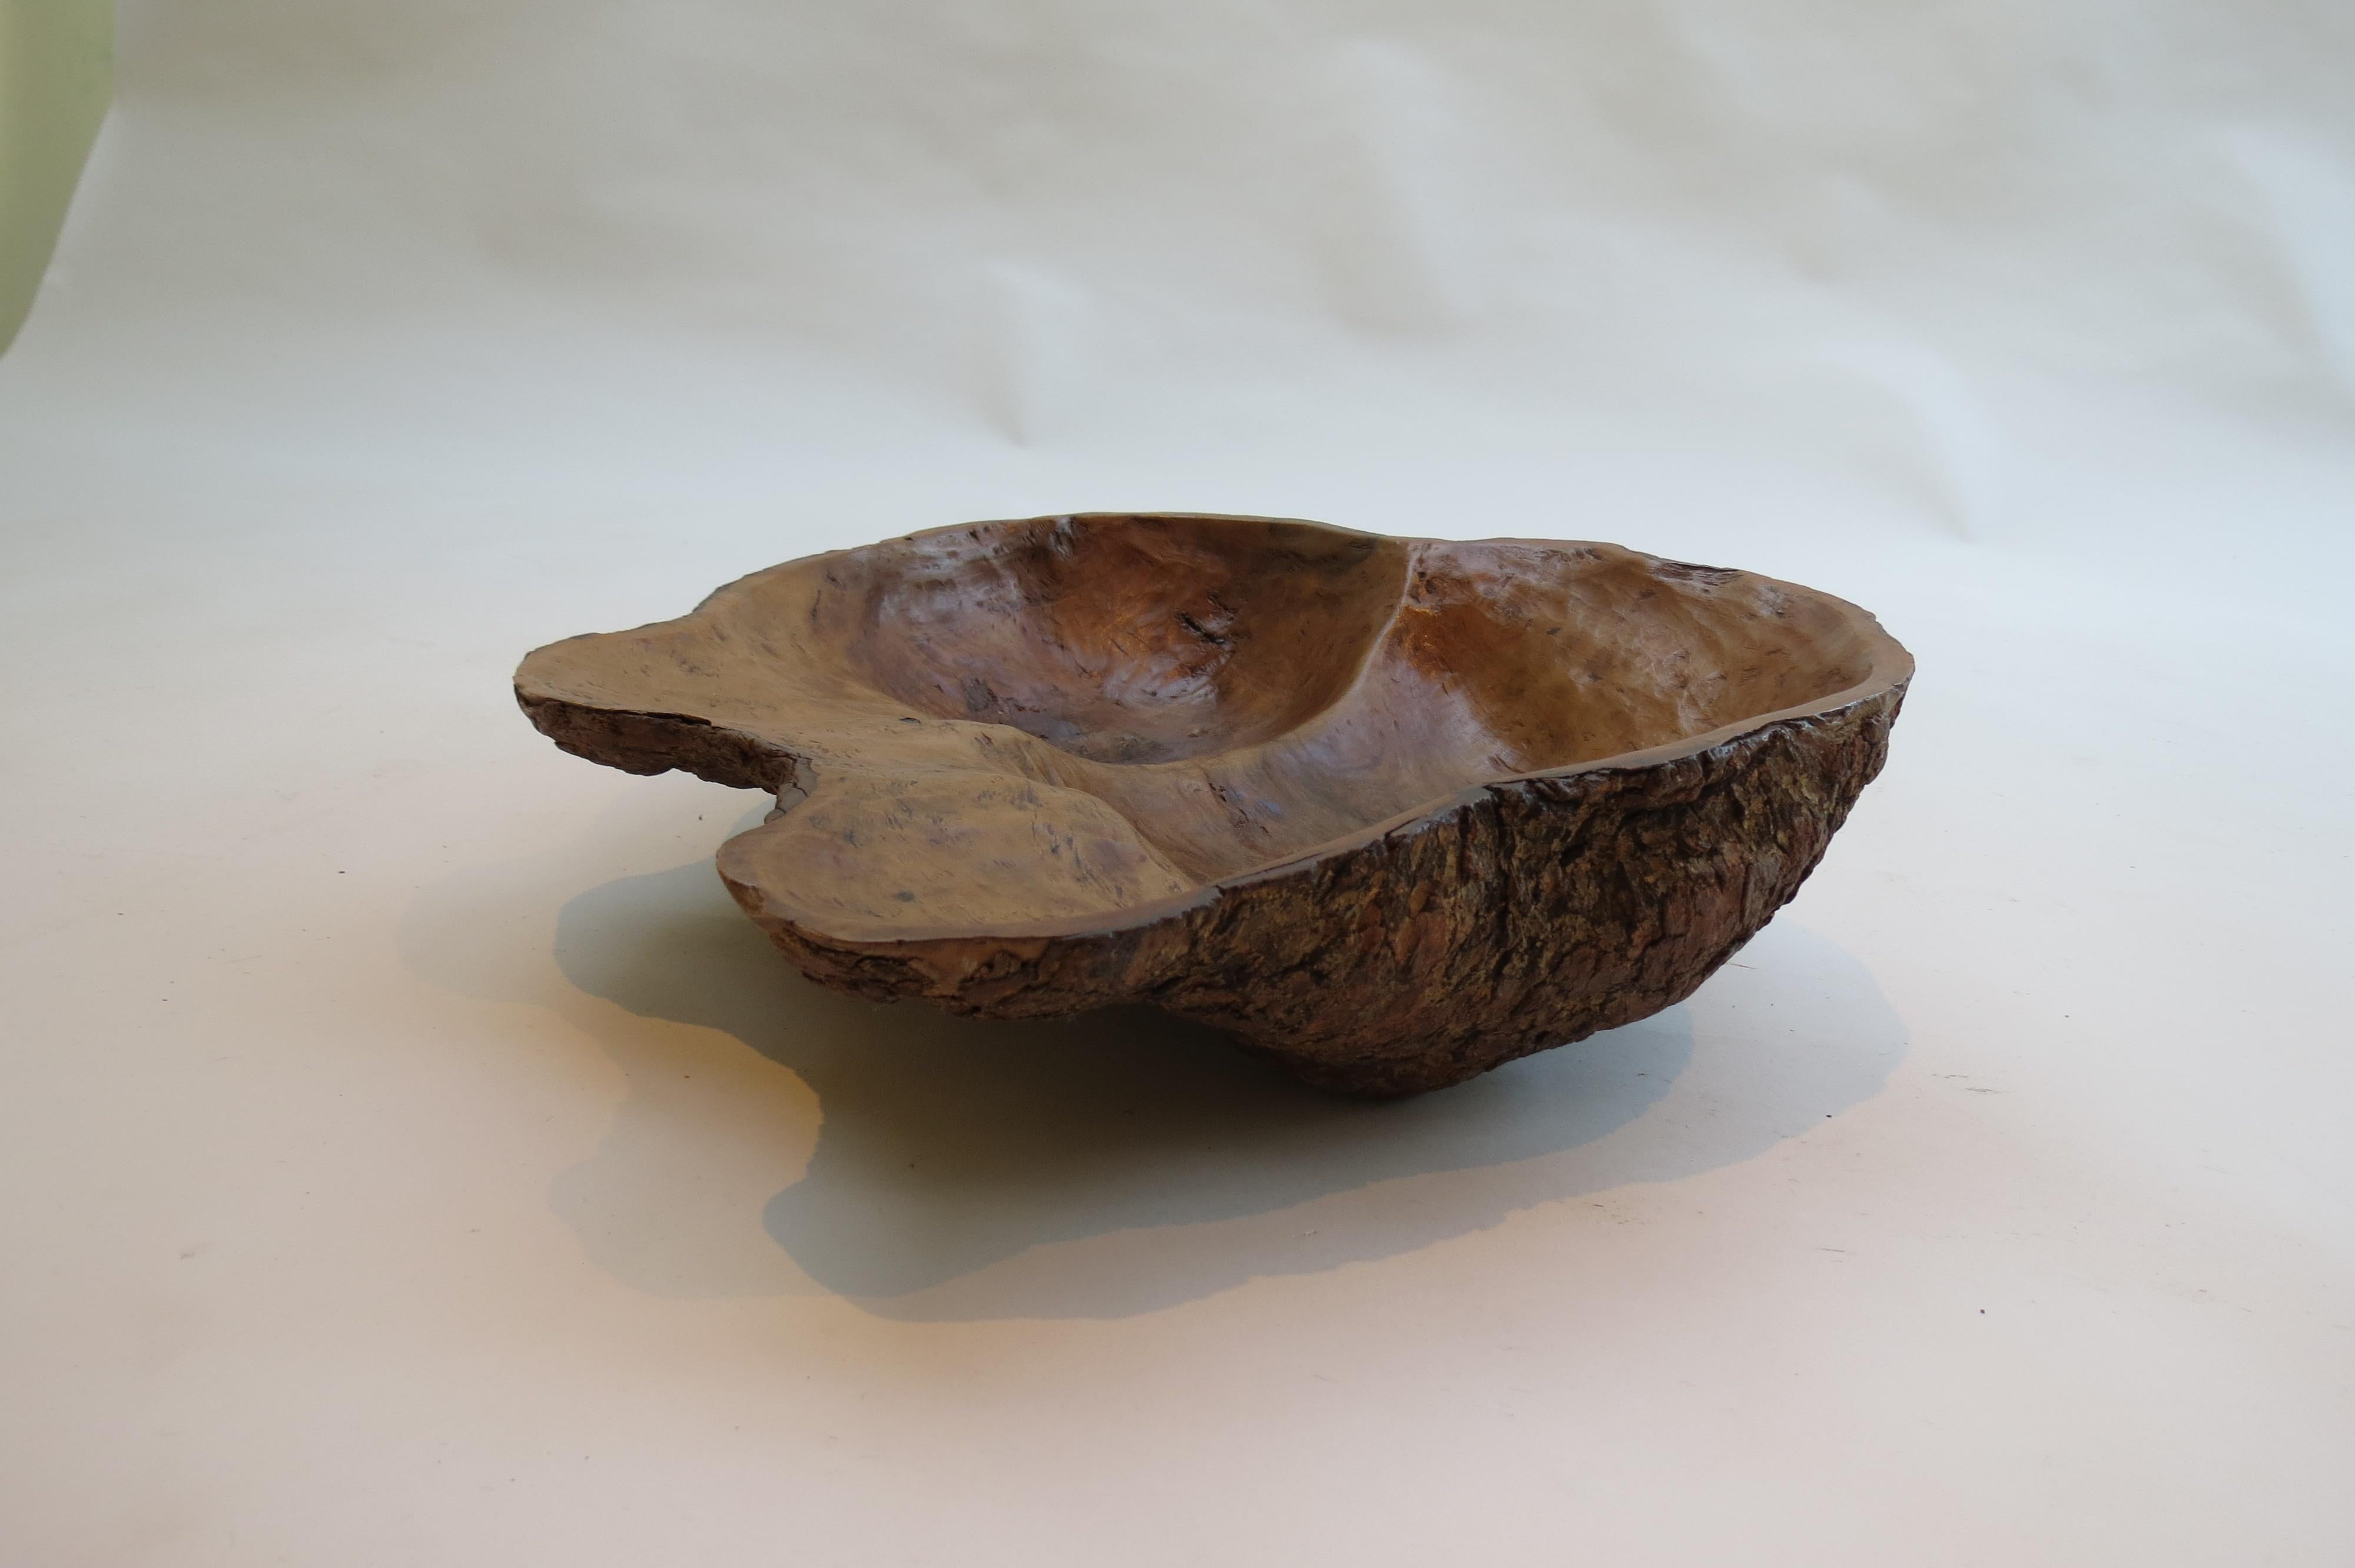 1970s Wooden Bowl Made from Olive Wood (Olivenholz)